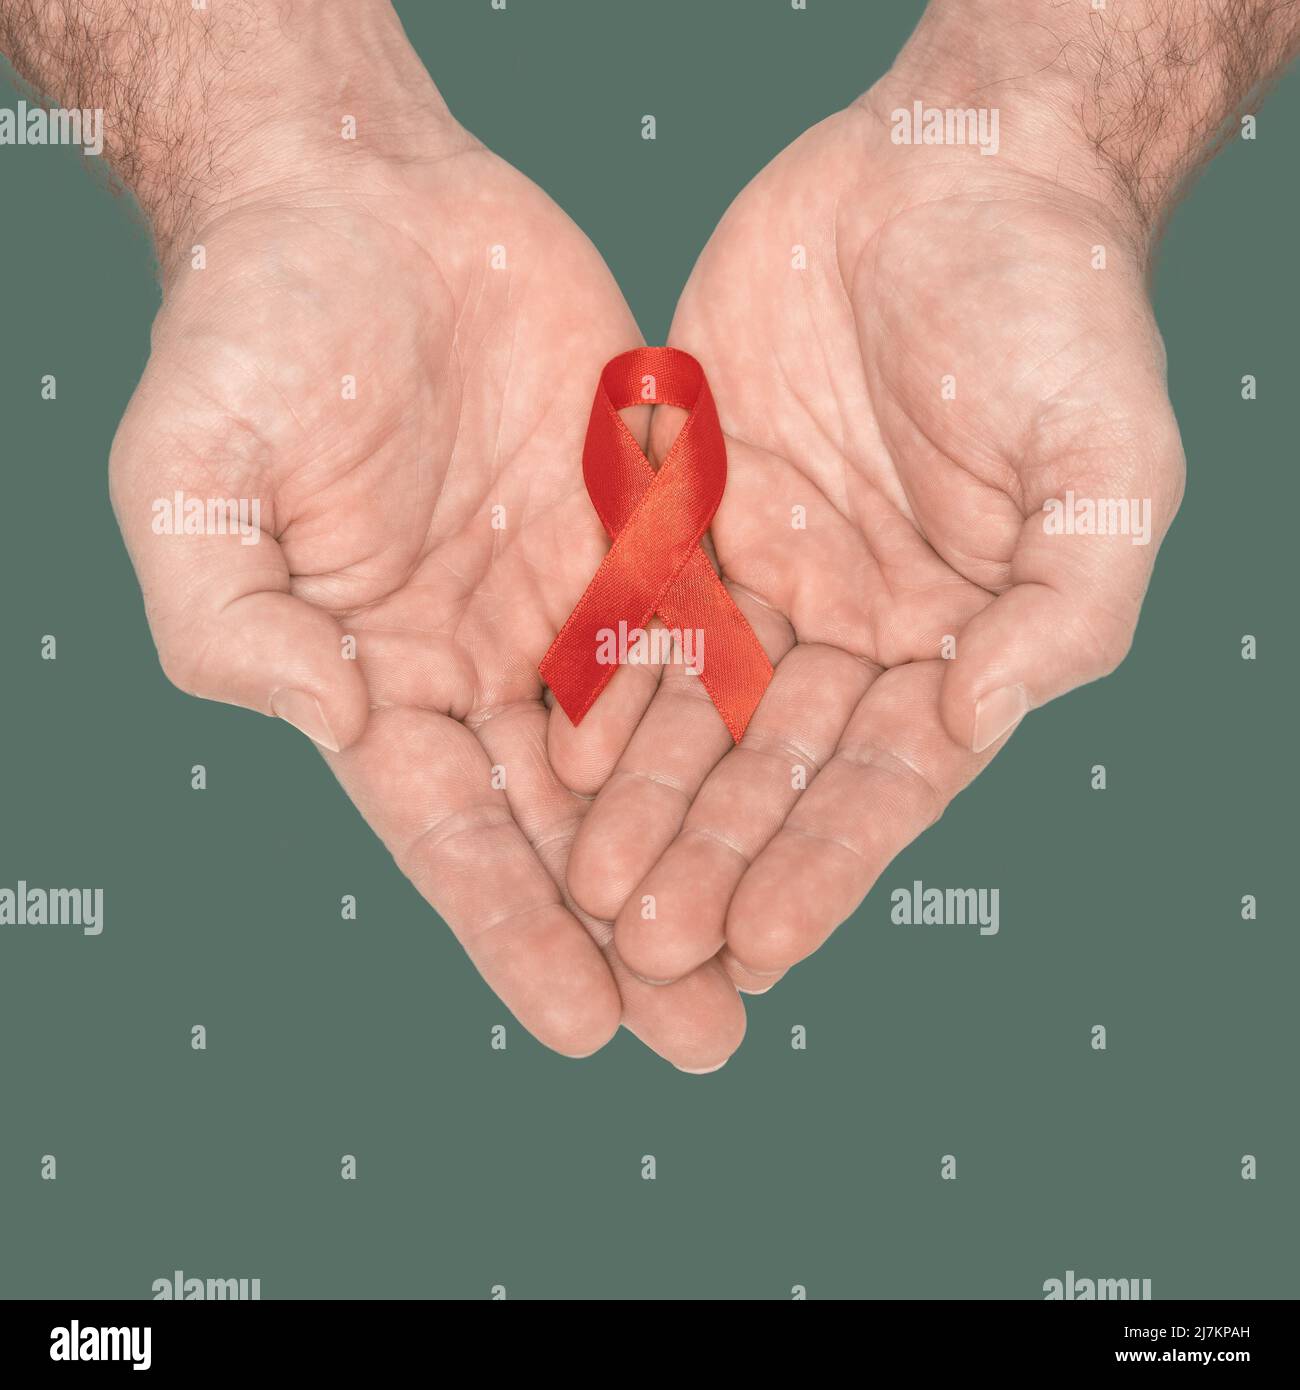 Red awareness ribbon bow on mans helping hands isolated on green background. HIV, AIDS world day. Social life issues concept. Aids charity fund concept. Healthcare and medicine concept.  Stock Photo